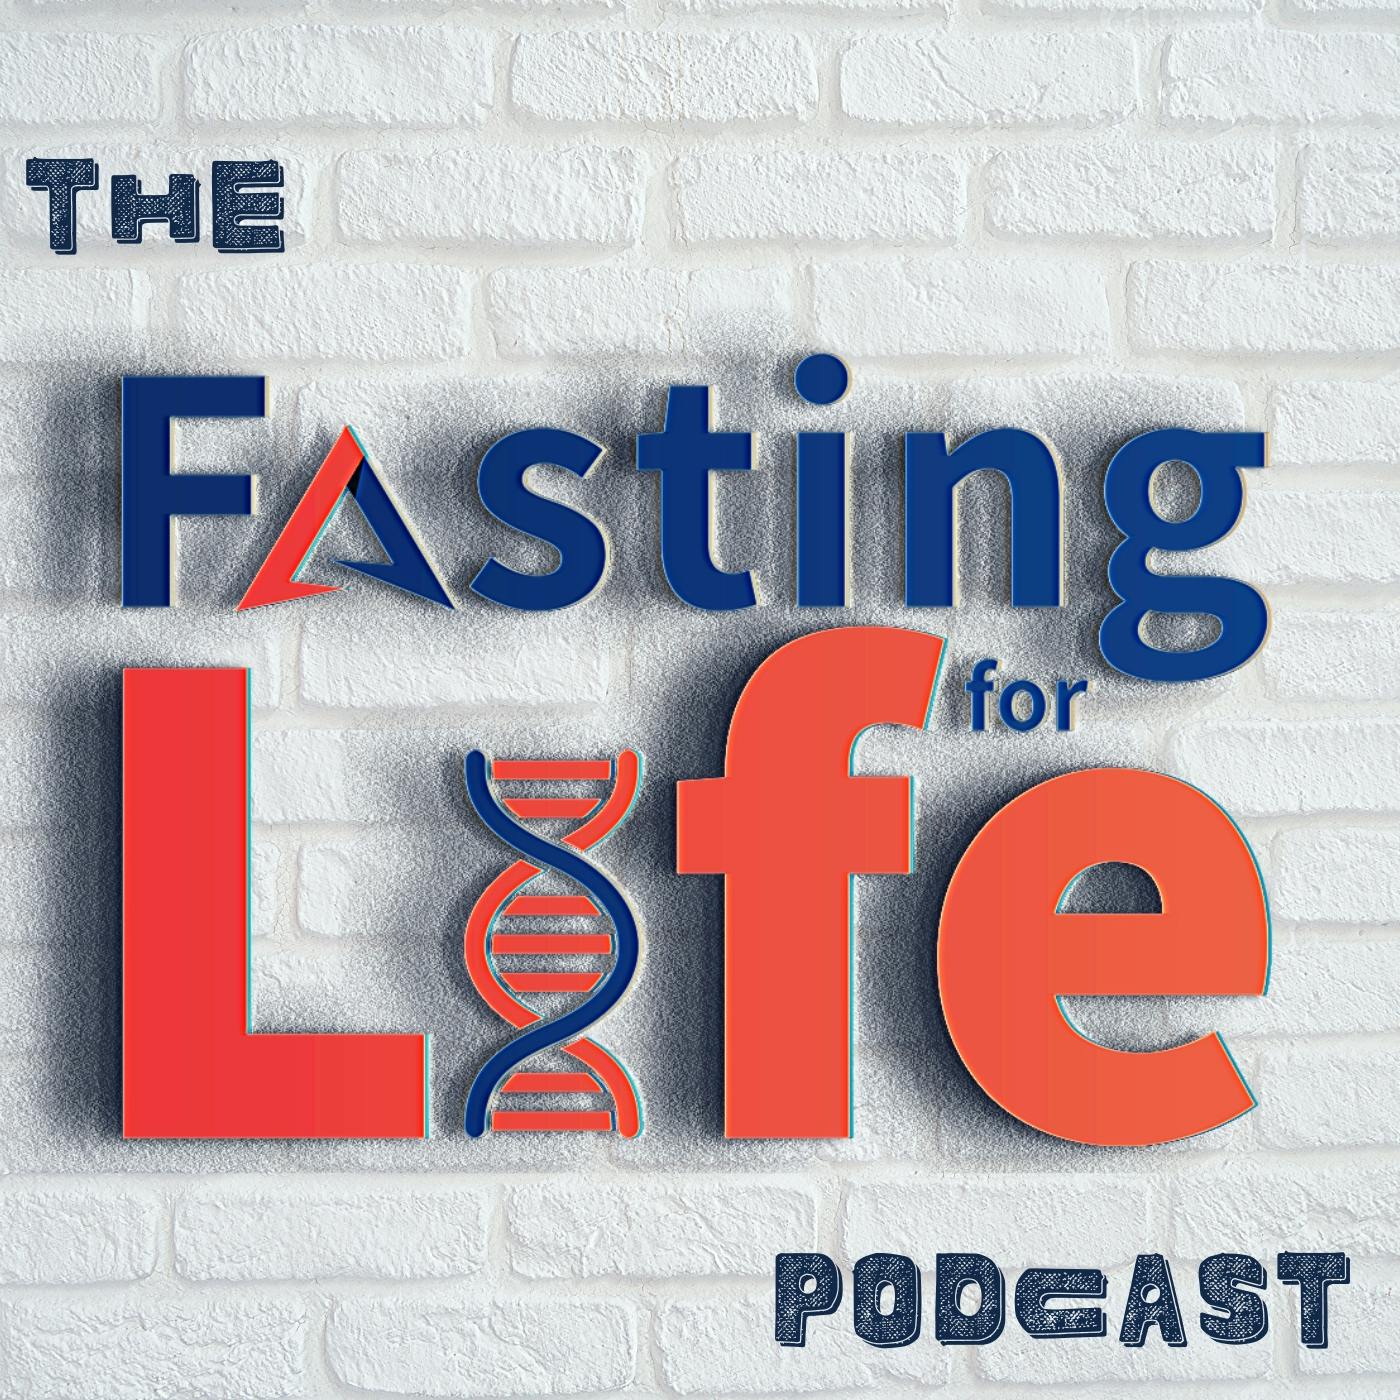 Ep. 177 - Exercise for health, NOT weight loss! | Should you work out fasted or fed? | Alternate Day Fasting (ADF) & exercise burn visceral fat, lower liver enzymes, increase insulin sensitivity 40% |